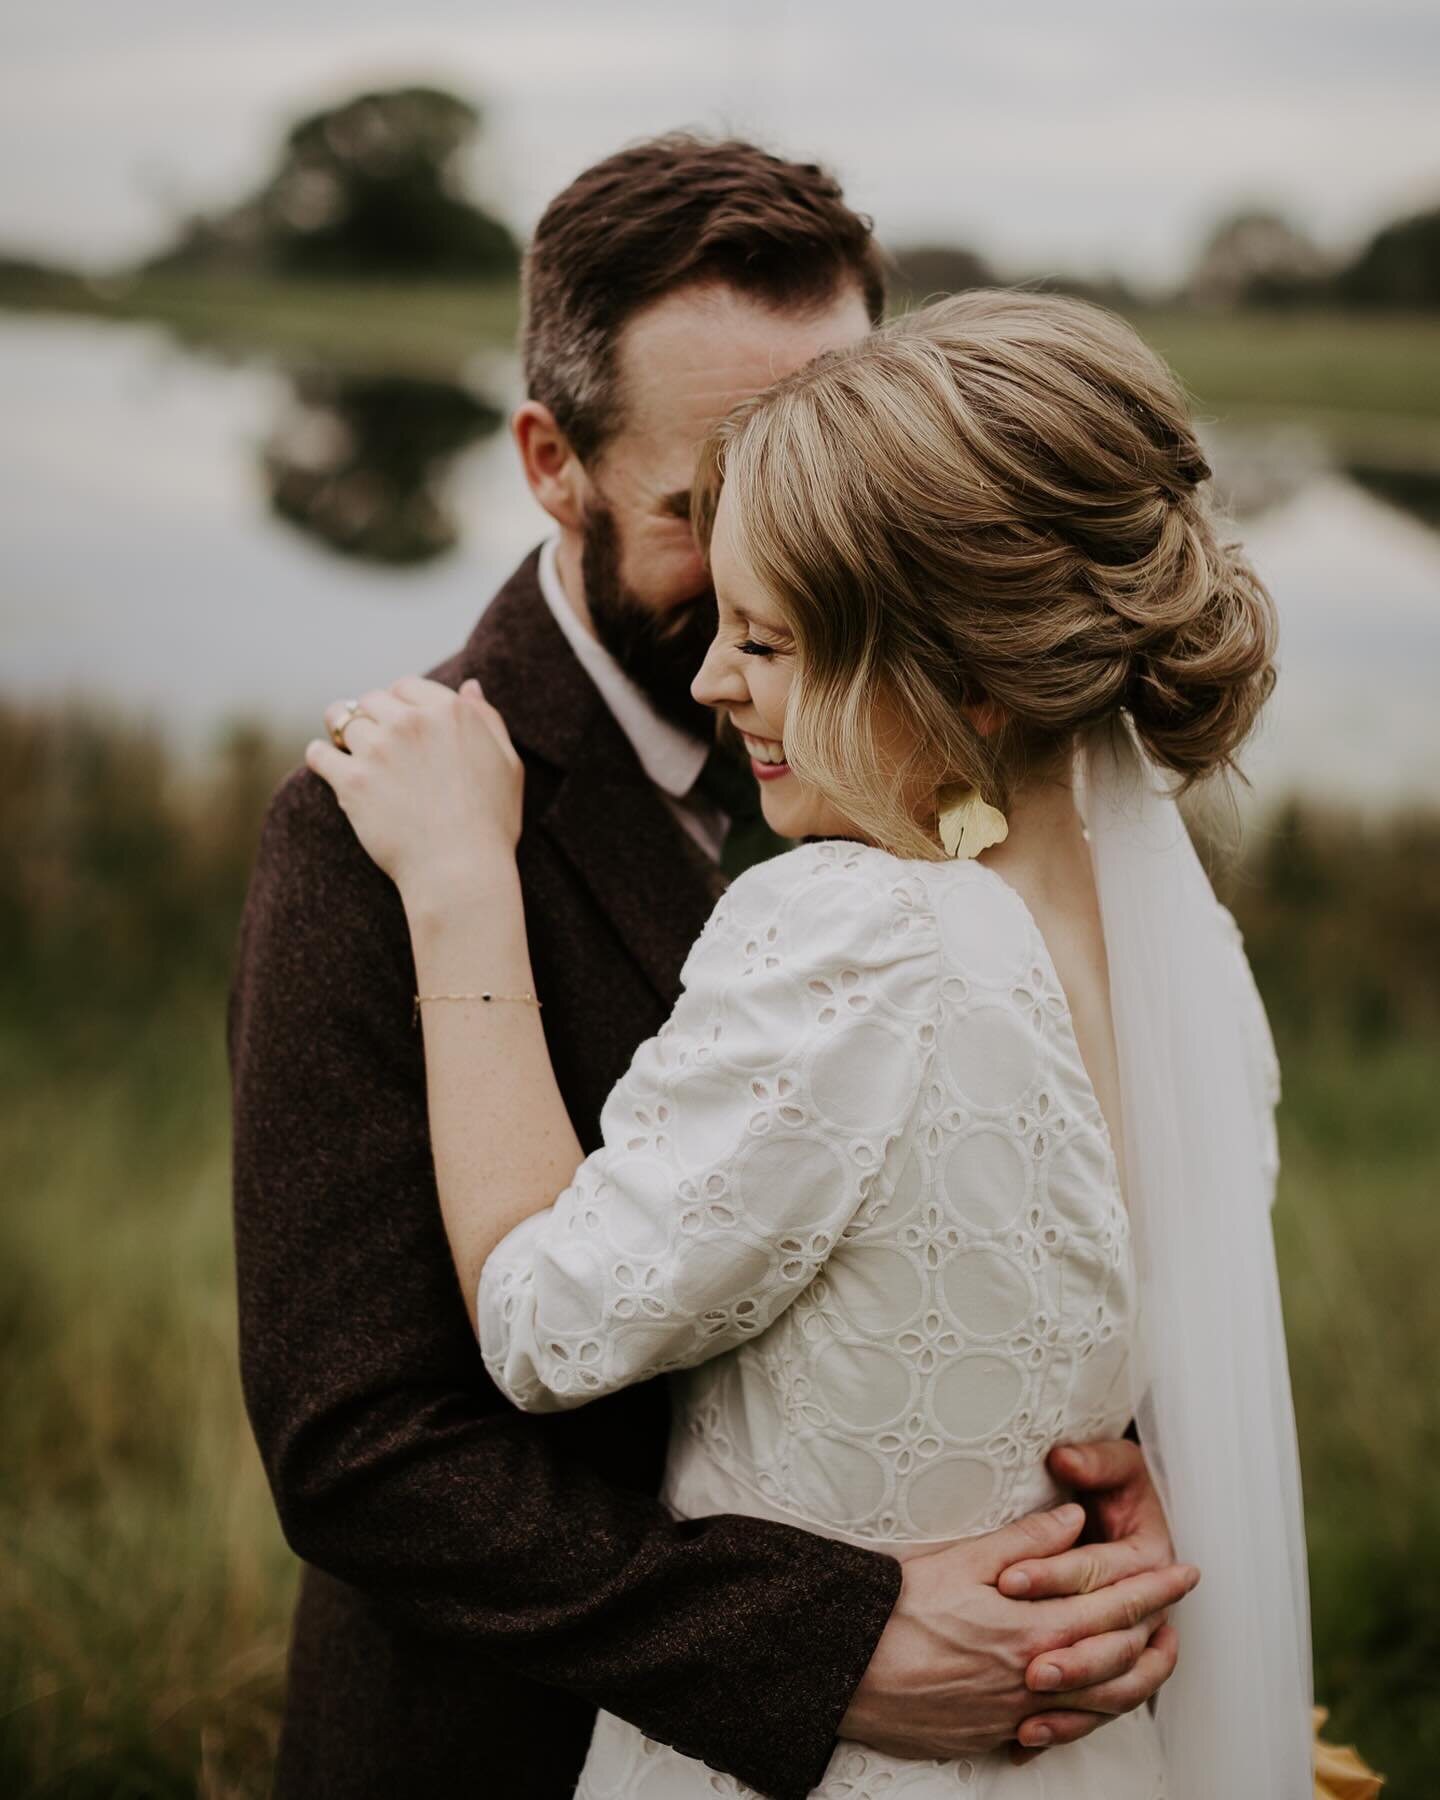 ~ Ella &amp; Drew~ Some belated love for this one. The colours &amp; soft light of this day were so lovely. 

Venue - @yandinastation 
Florist - @willowbudflowers 
Celebrant + MC - @danfordcelebrant 
Band - @radioclubband 
Cake - @chocolate2chilli 
M